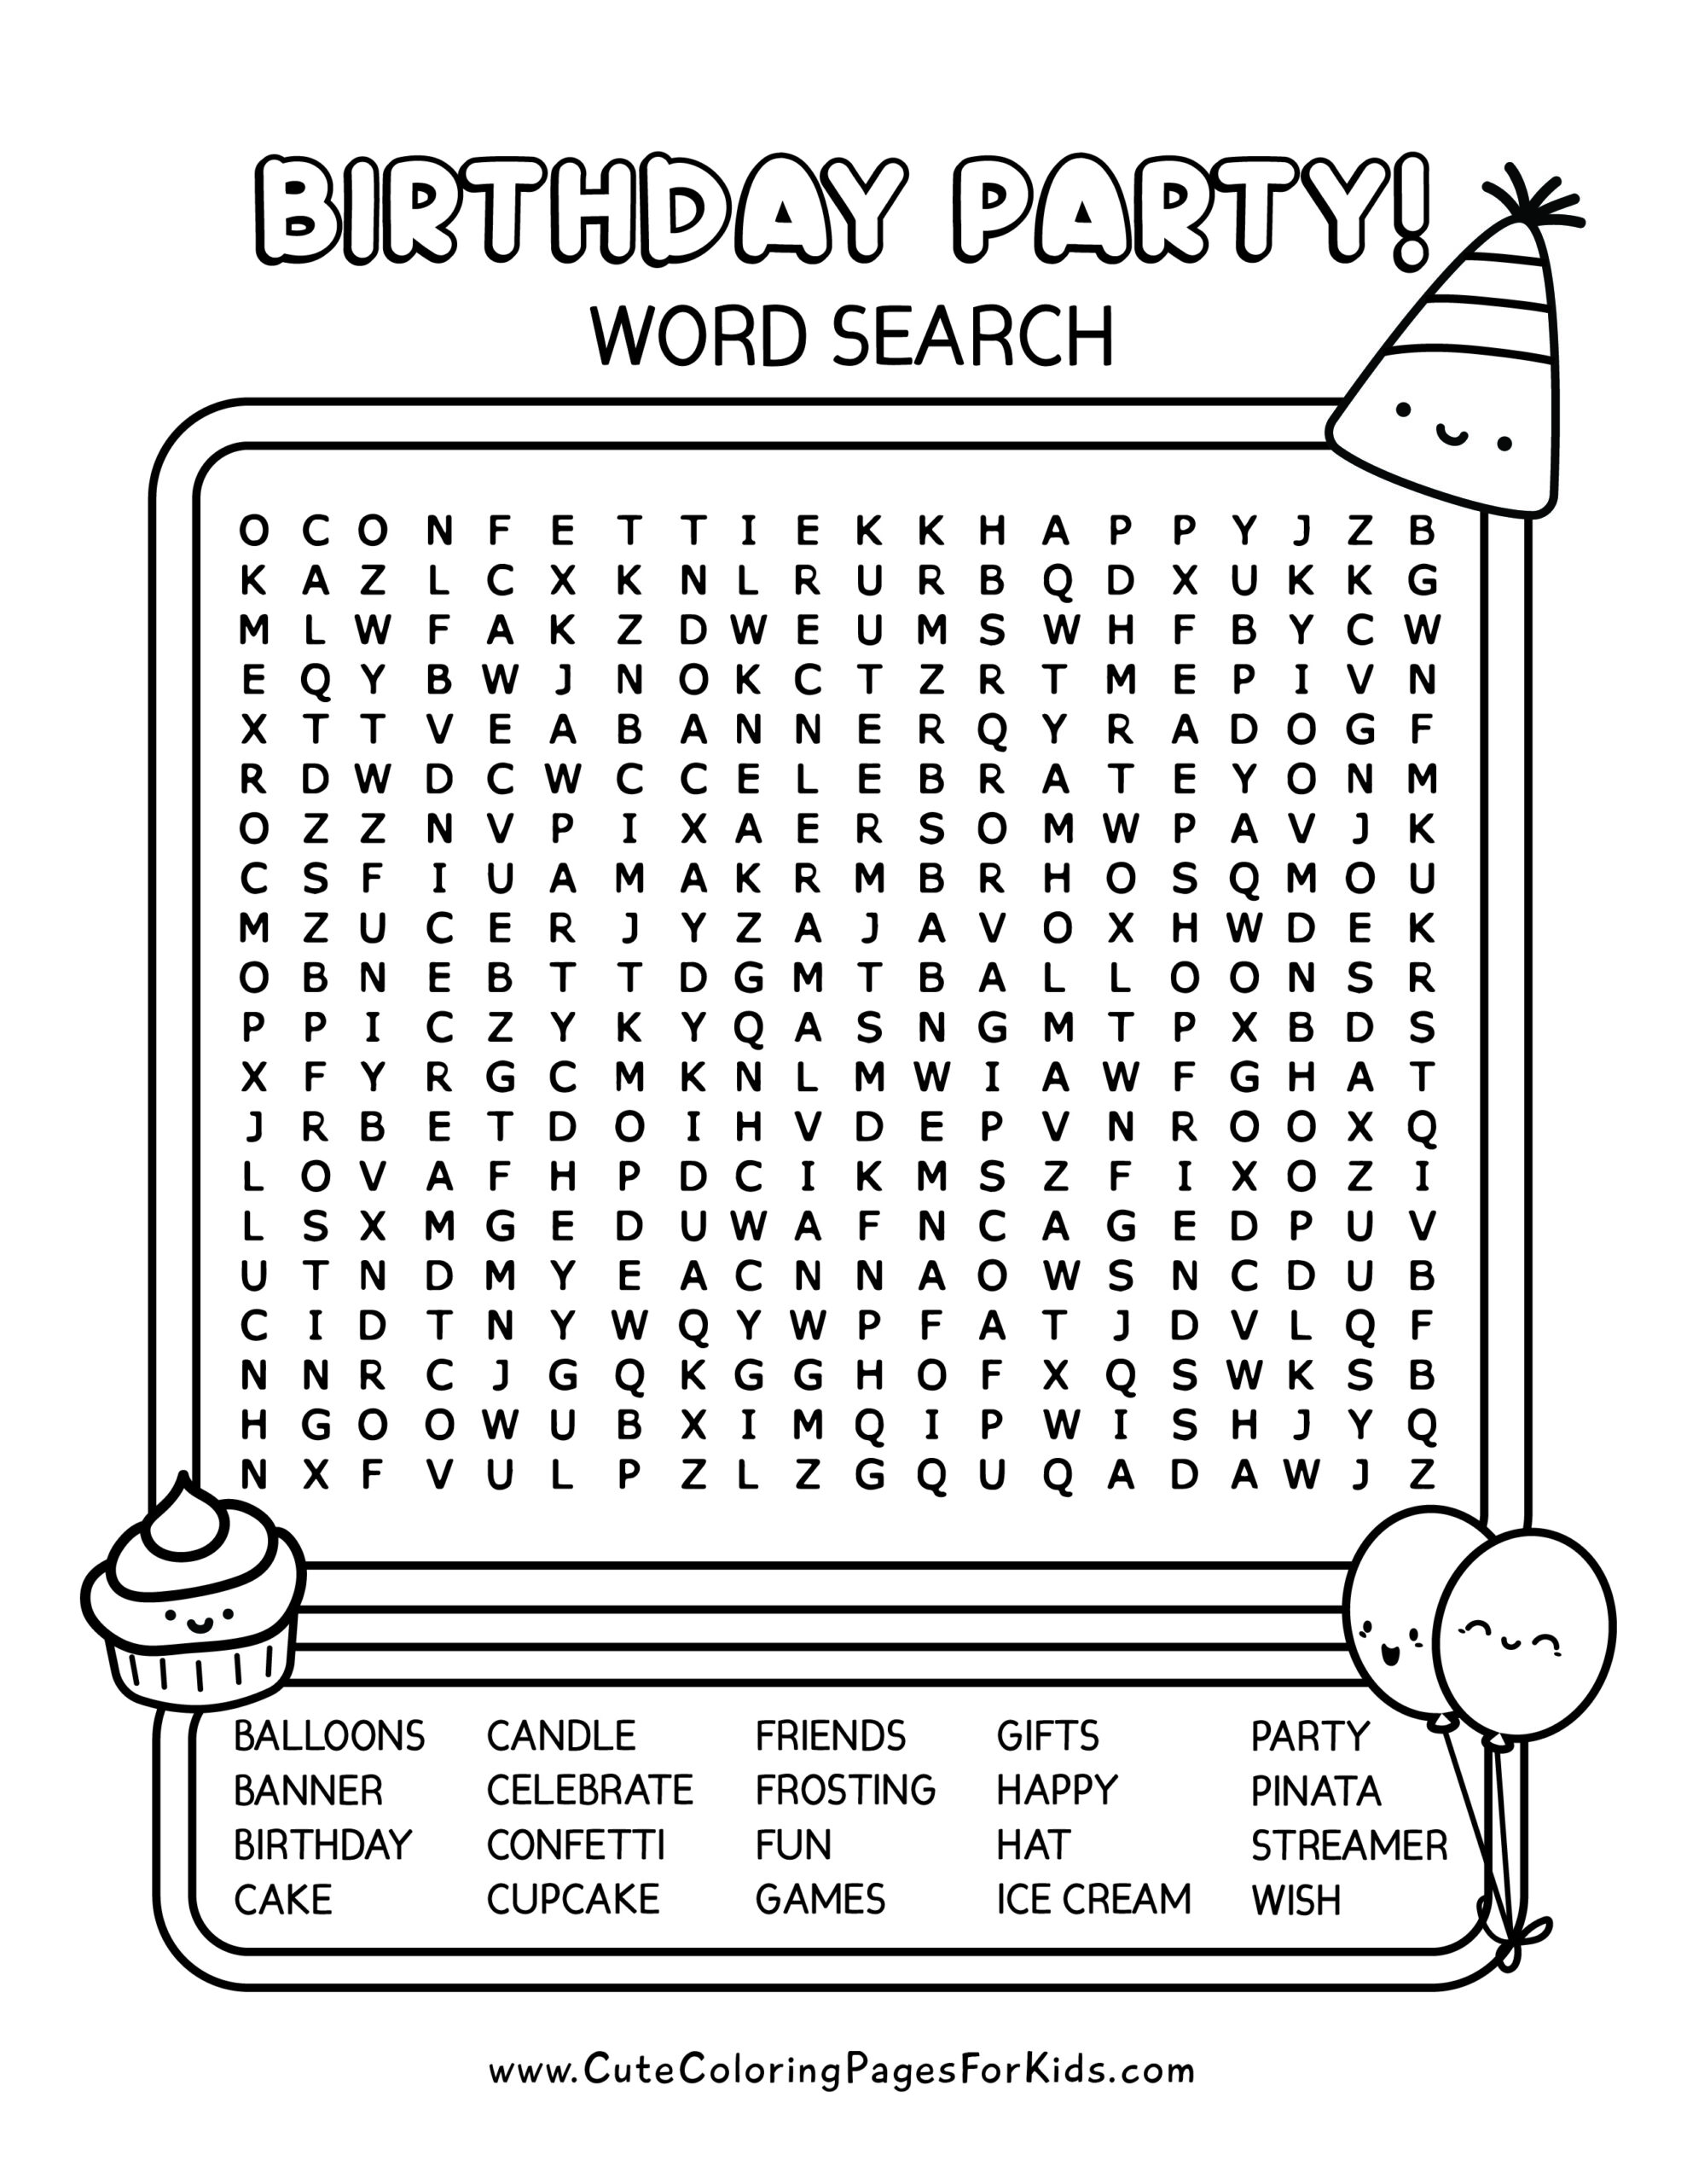 Birthday Party Word Search Cute Coloring Pages For Kids